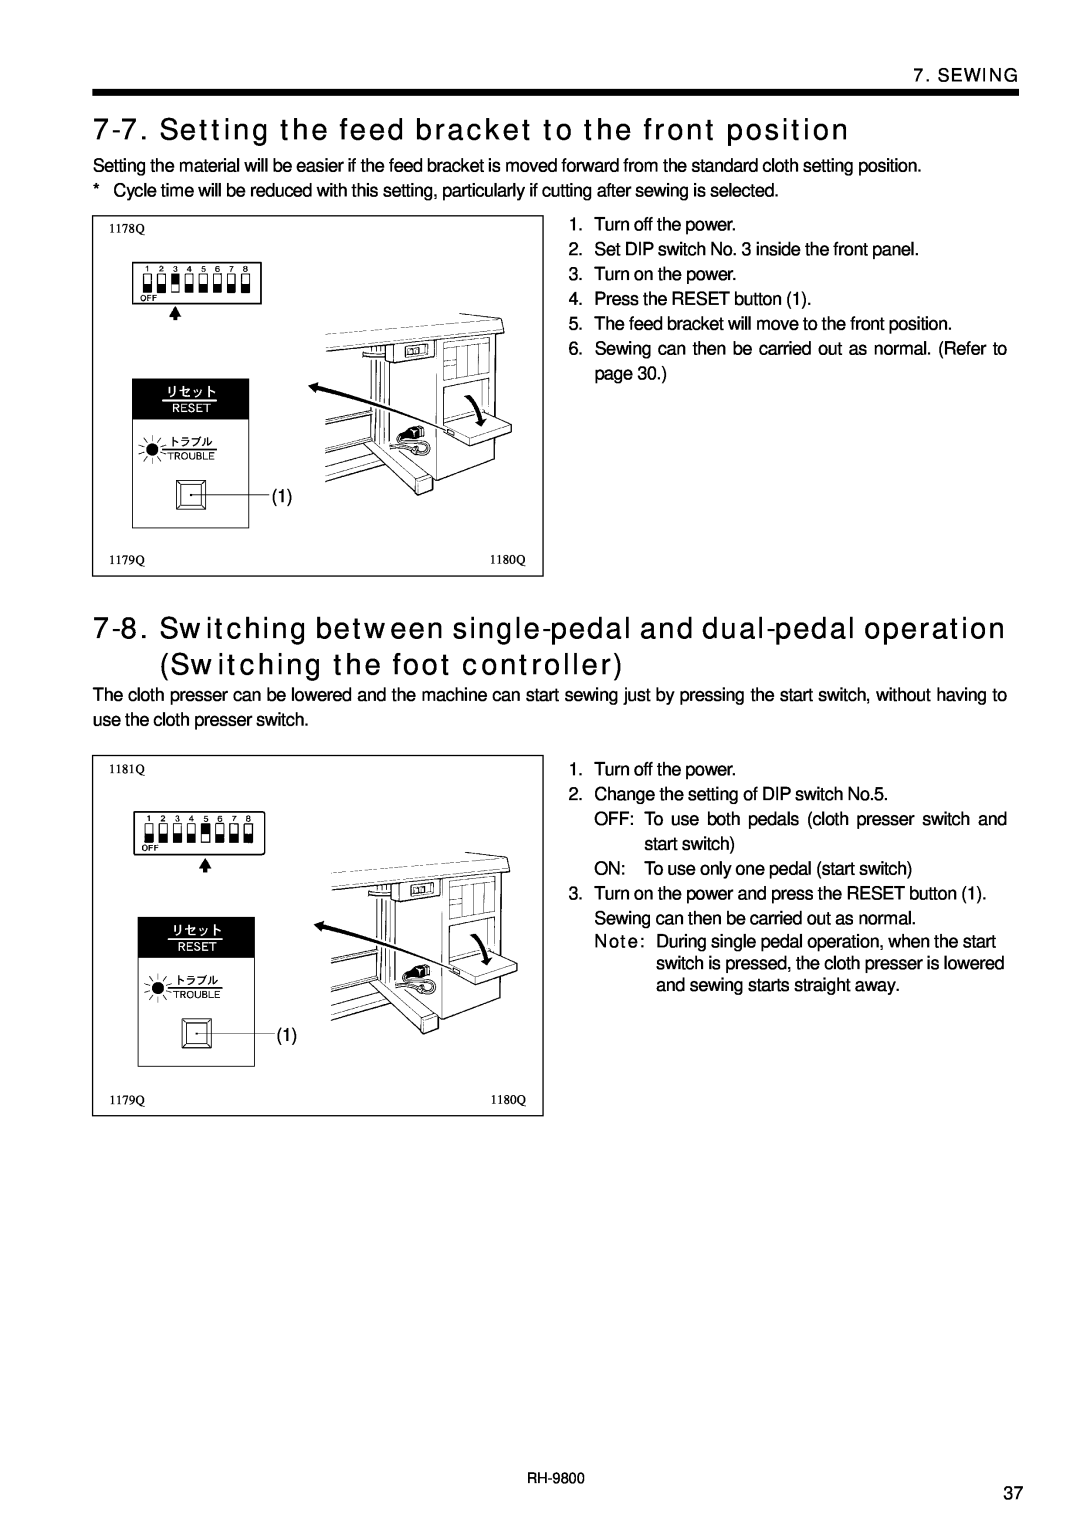 Brother DH4-B980 instruction manual Setting the feed bracket to the front position, Sewing 